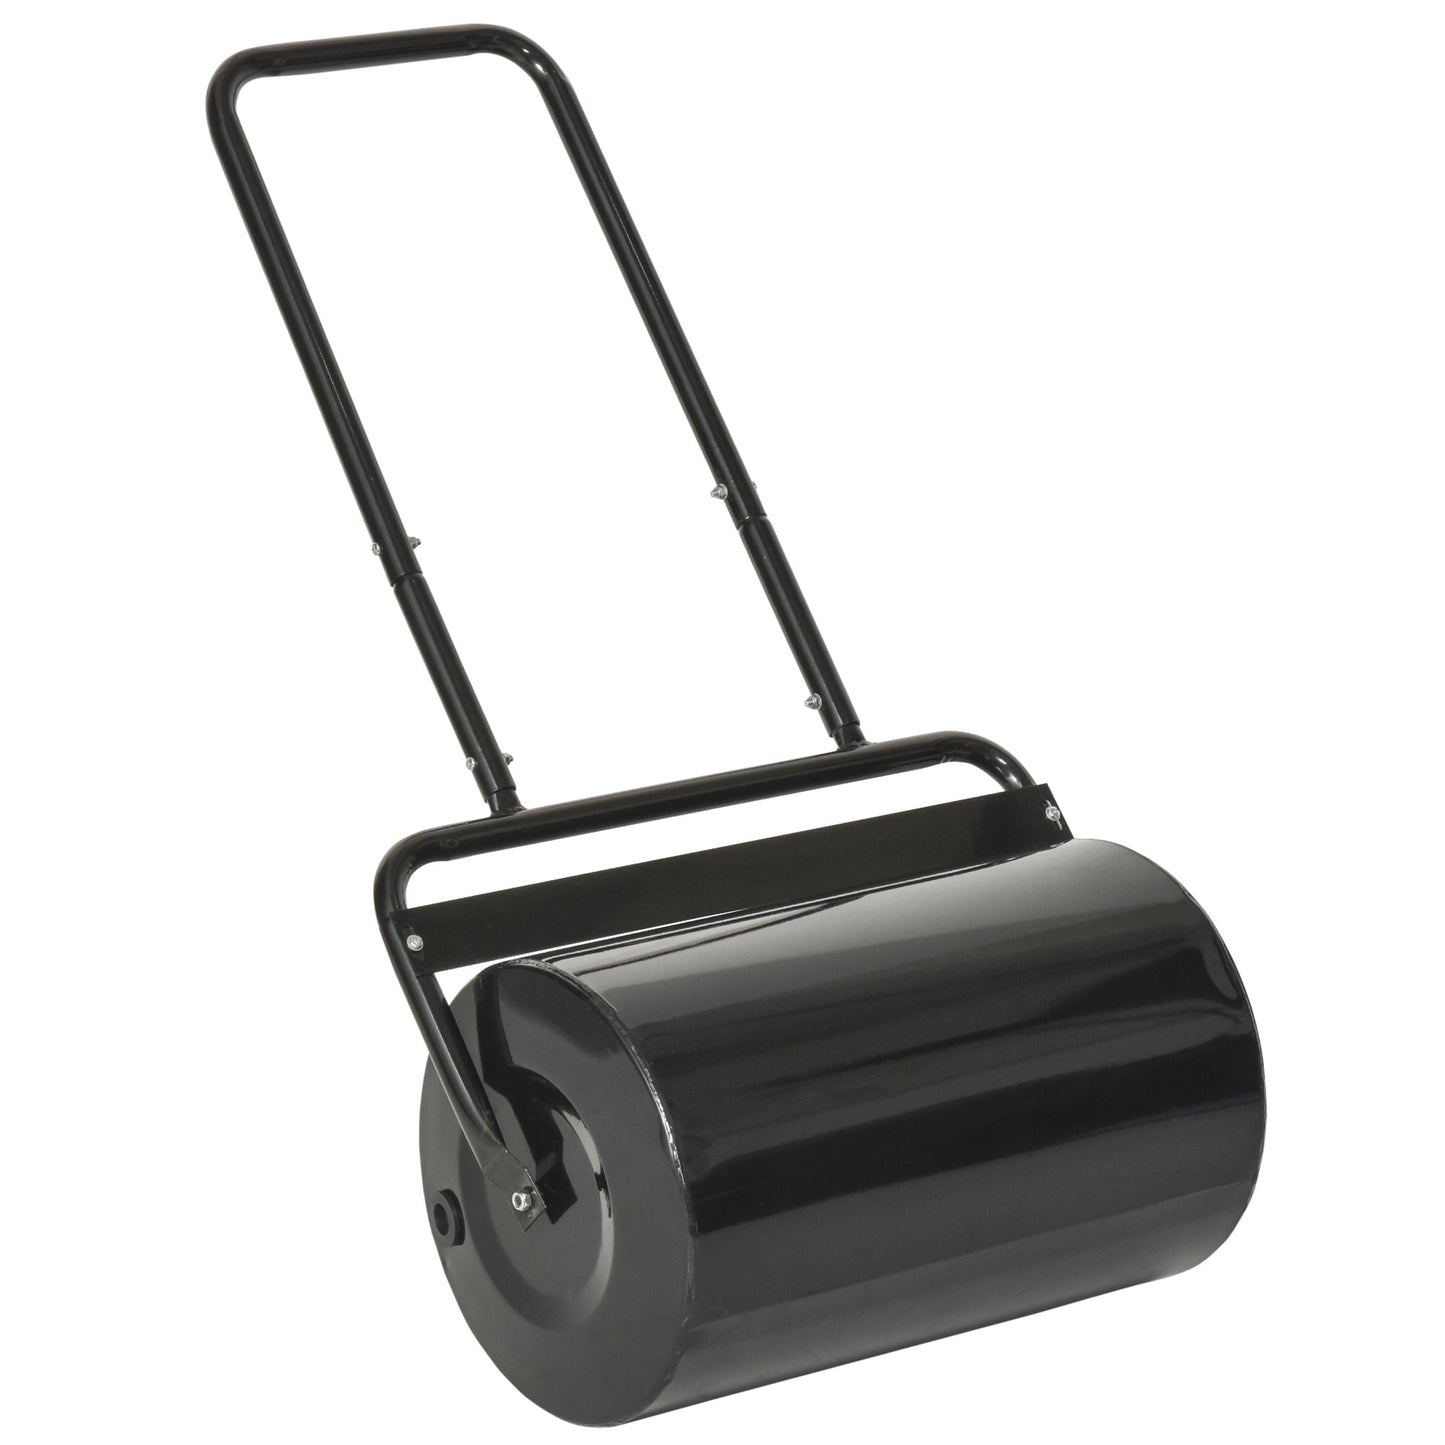 Outsunny garden roller φ32x50cm in black waterproof metal, tank up to 38 liters (water or sand)